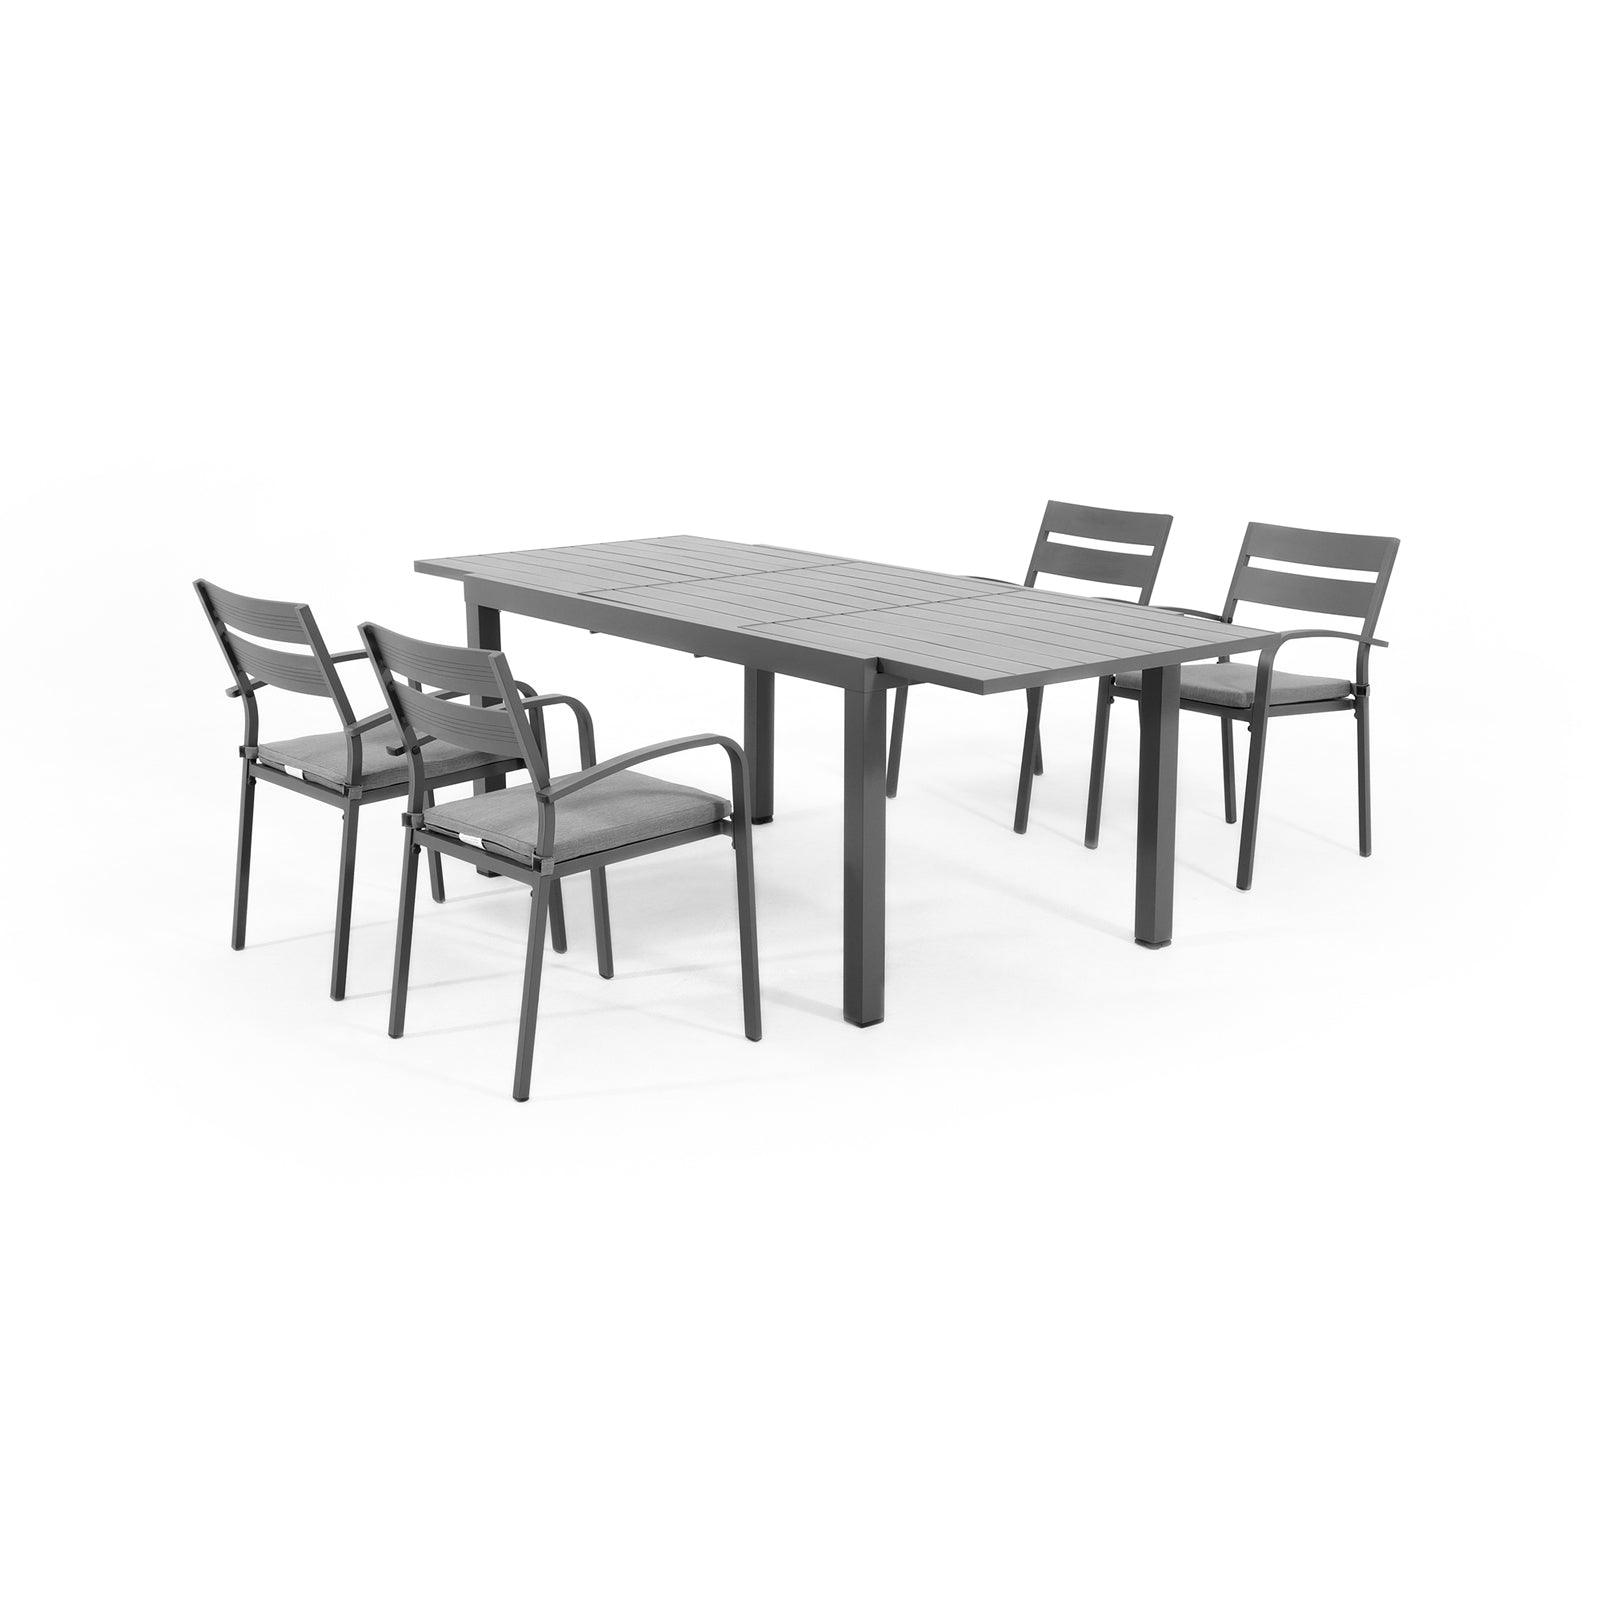 Salina Grey Aluminum Outdoor Dining Set, 4 dining chairs with cushions and 1 Extendable Table - Jardina Furniture #color_Grey#Pieces_5-pc.